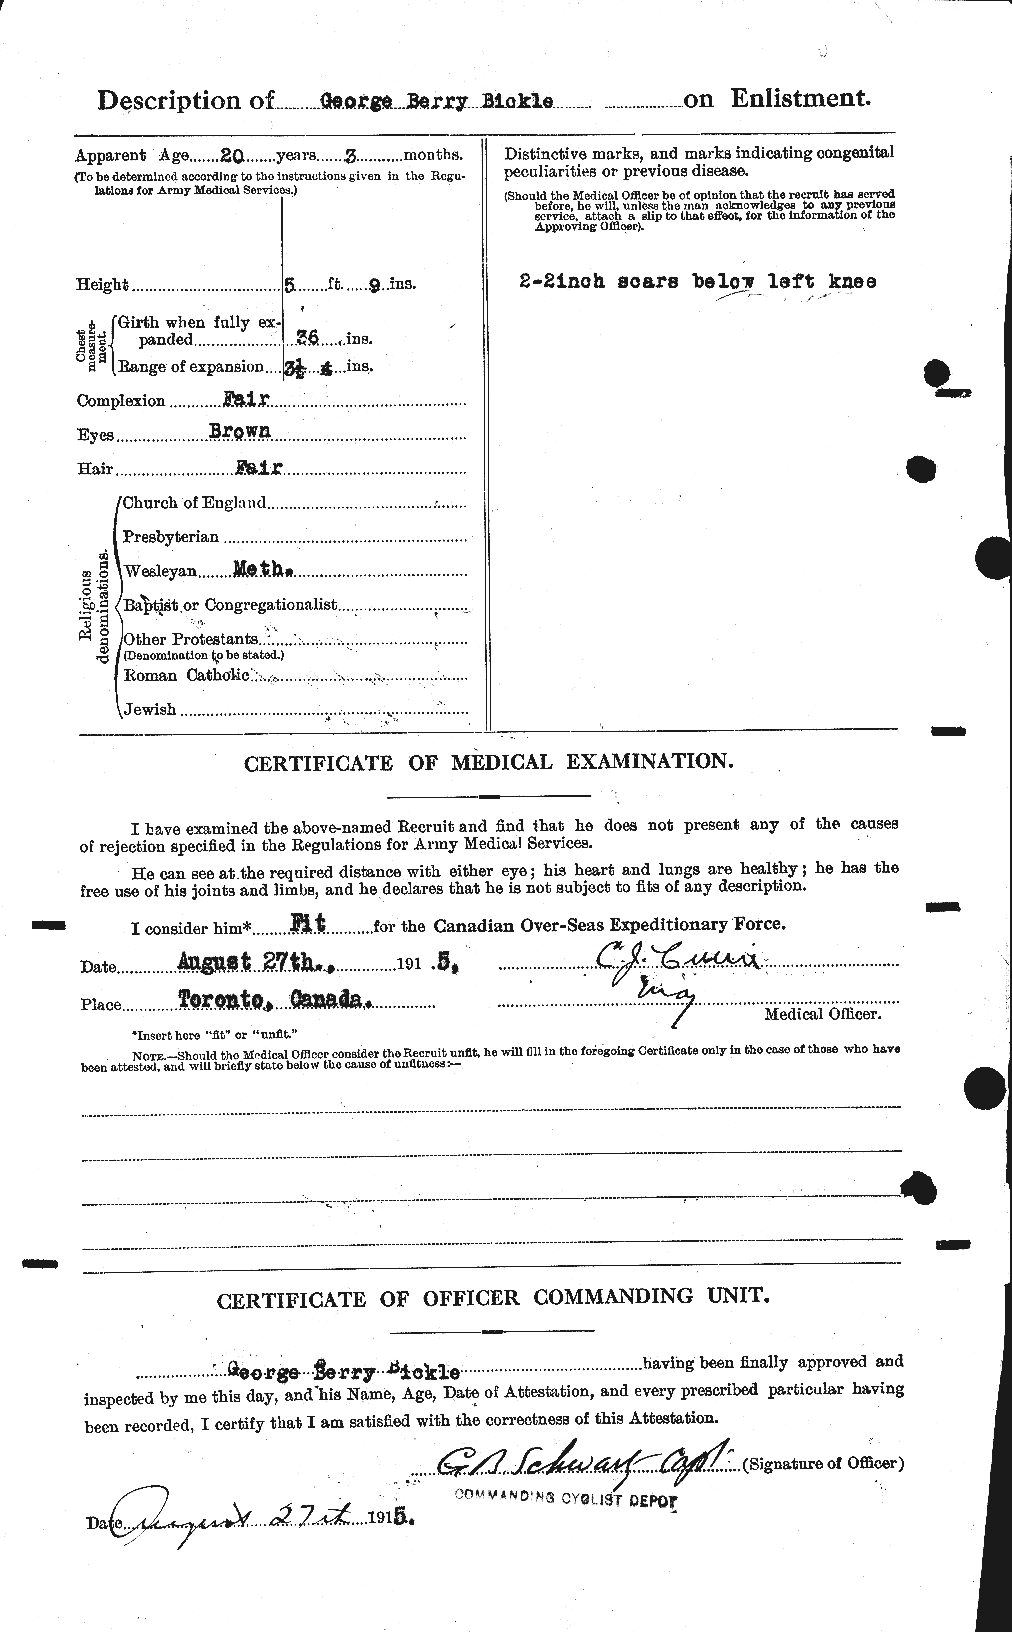 Personnel Records of the First World War - CEF 244897b